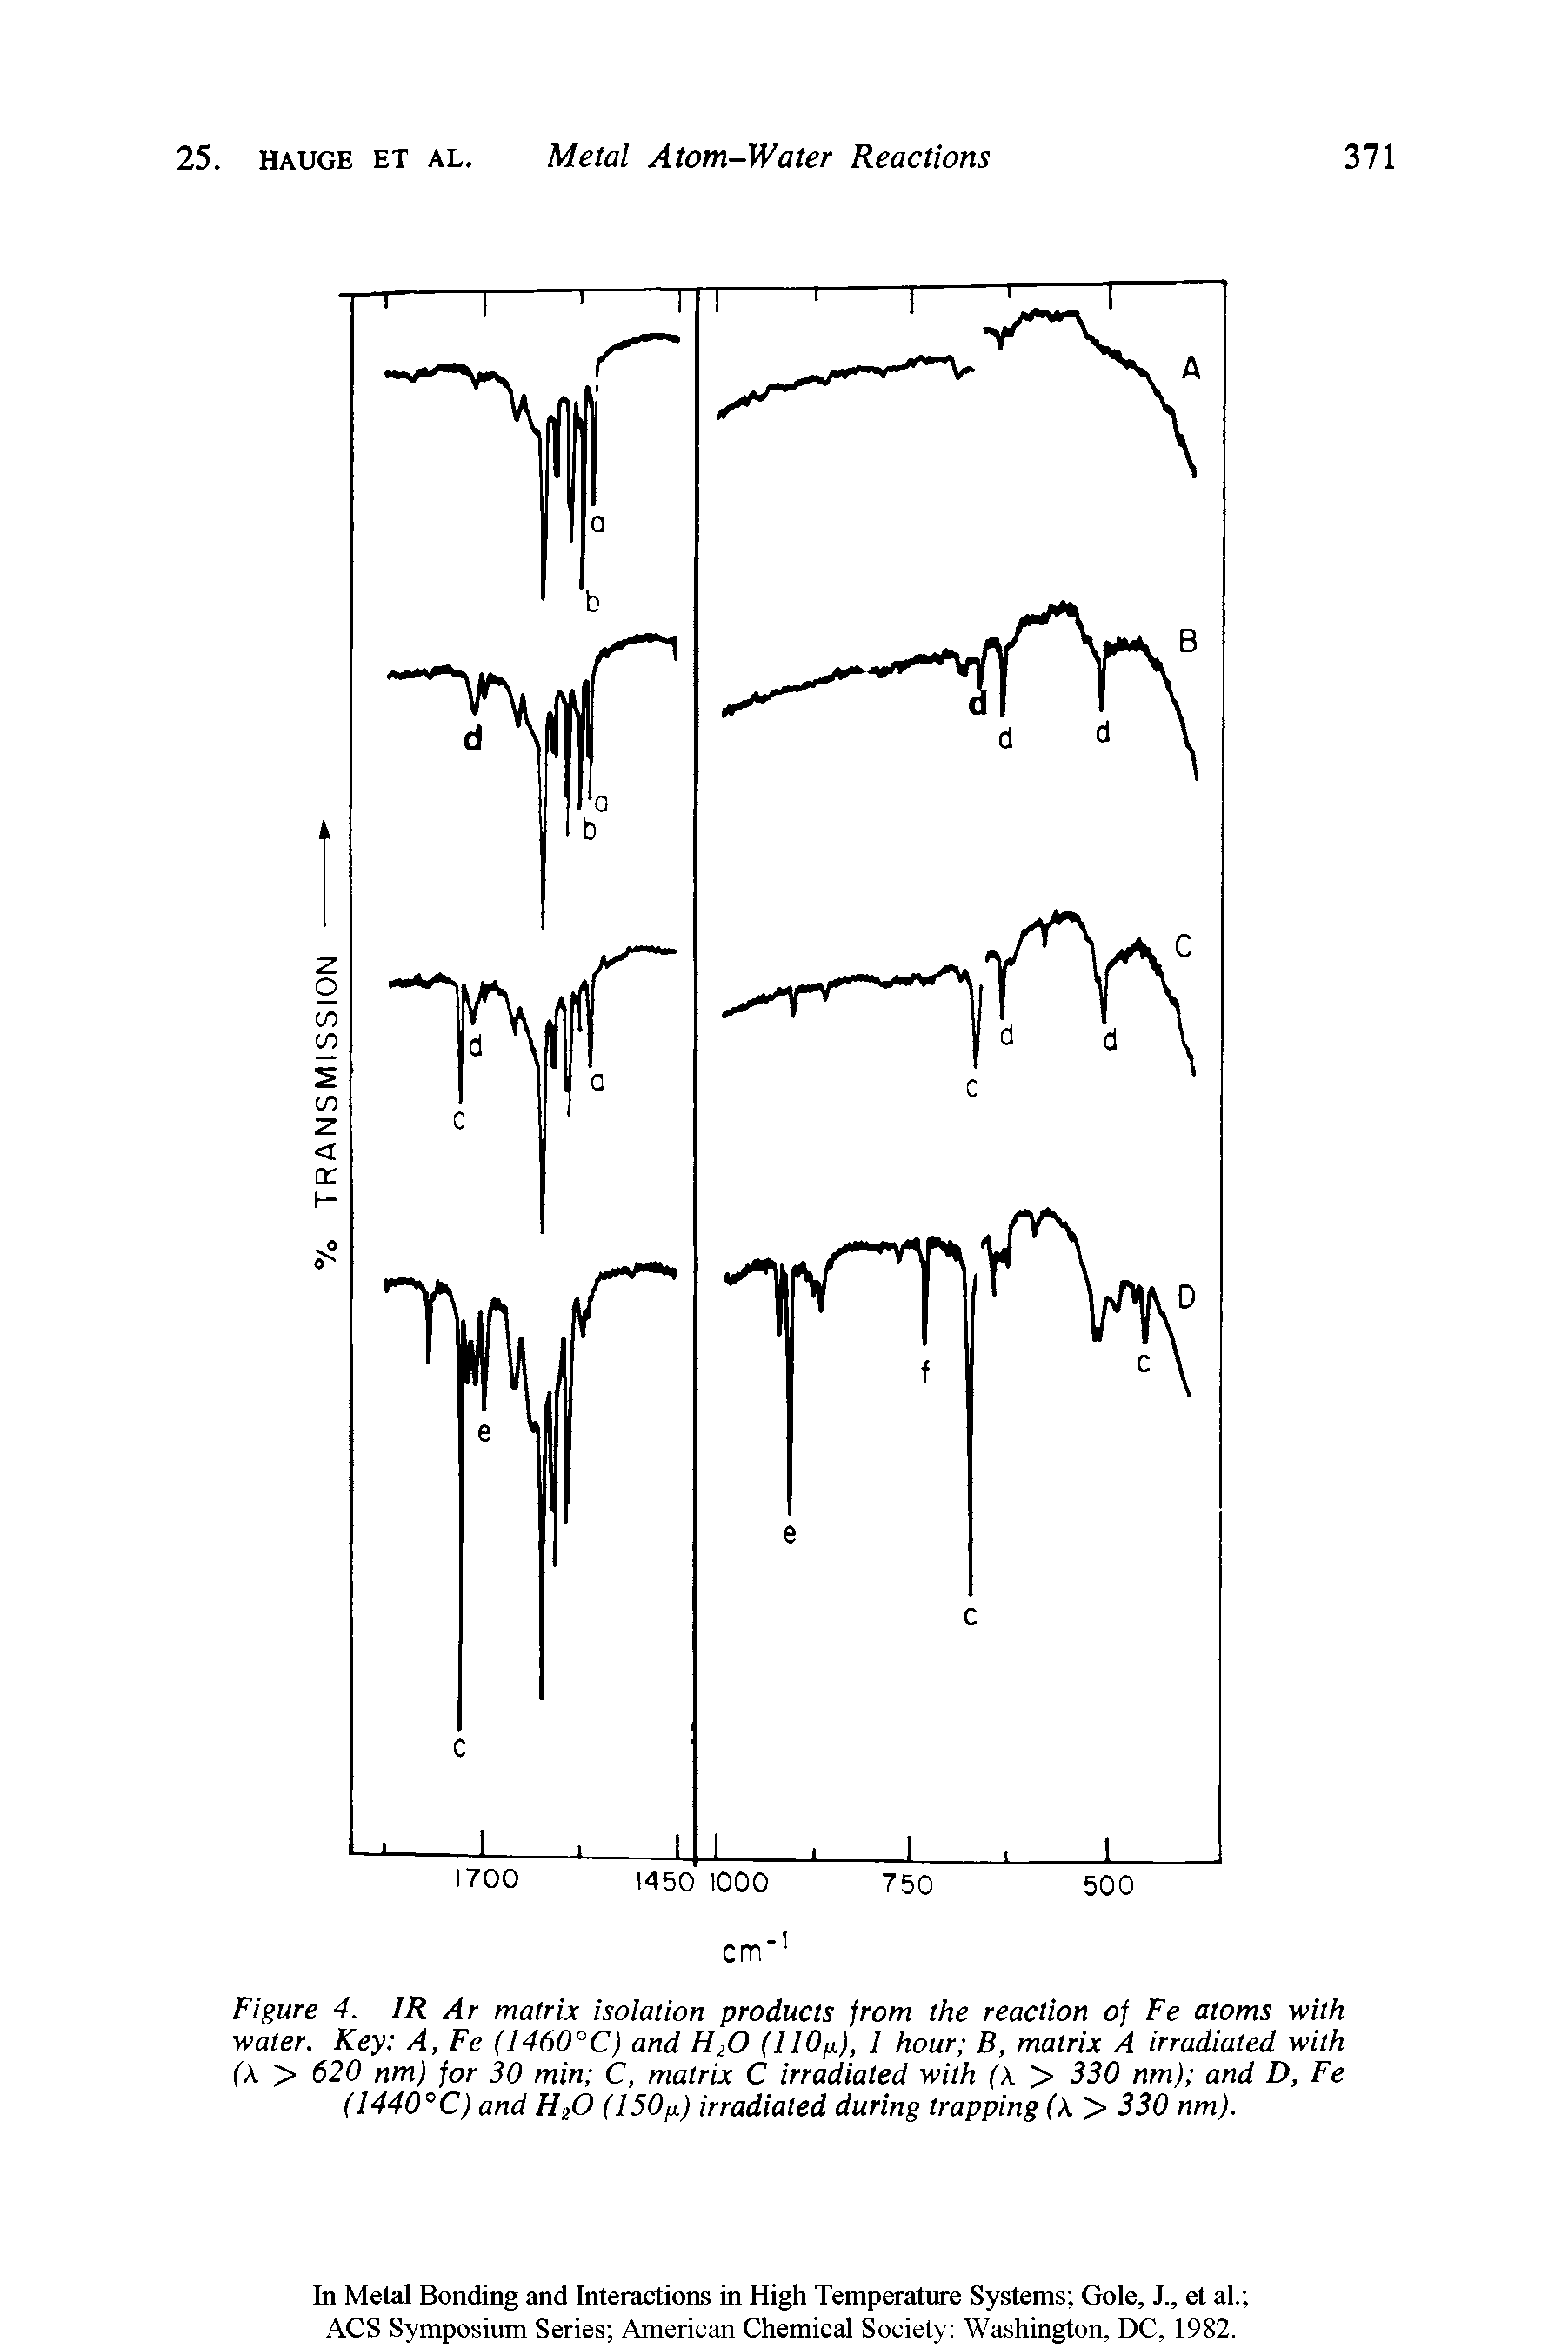 Figure 4. IR Ar matrix isolation products from the reaction of Fe atoms with water. Key A, Fe (I460°C) and H O (IIO x), 1 hour B, matrix A irradiated with (X > 620 nm) for 30 min C, matrix C irradiated with (X > 330 nm) and D, Fe (1440°C) and HiO (150jj.) irradiated during trapping (X2> 330 nm).